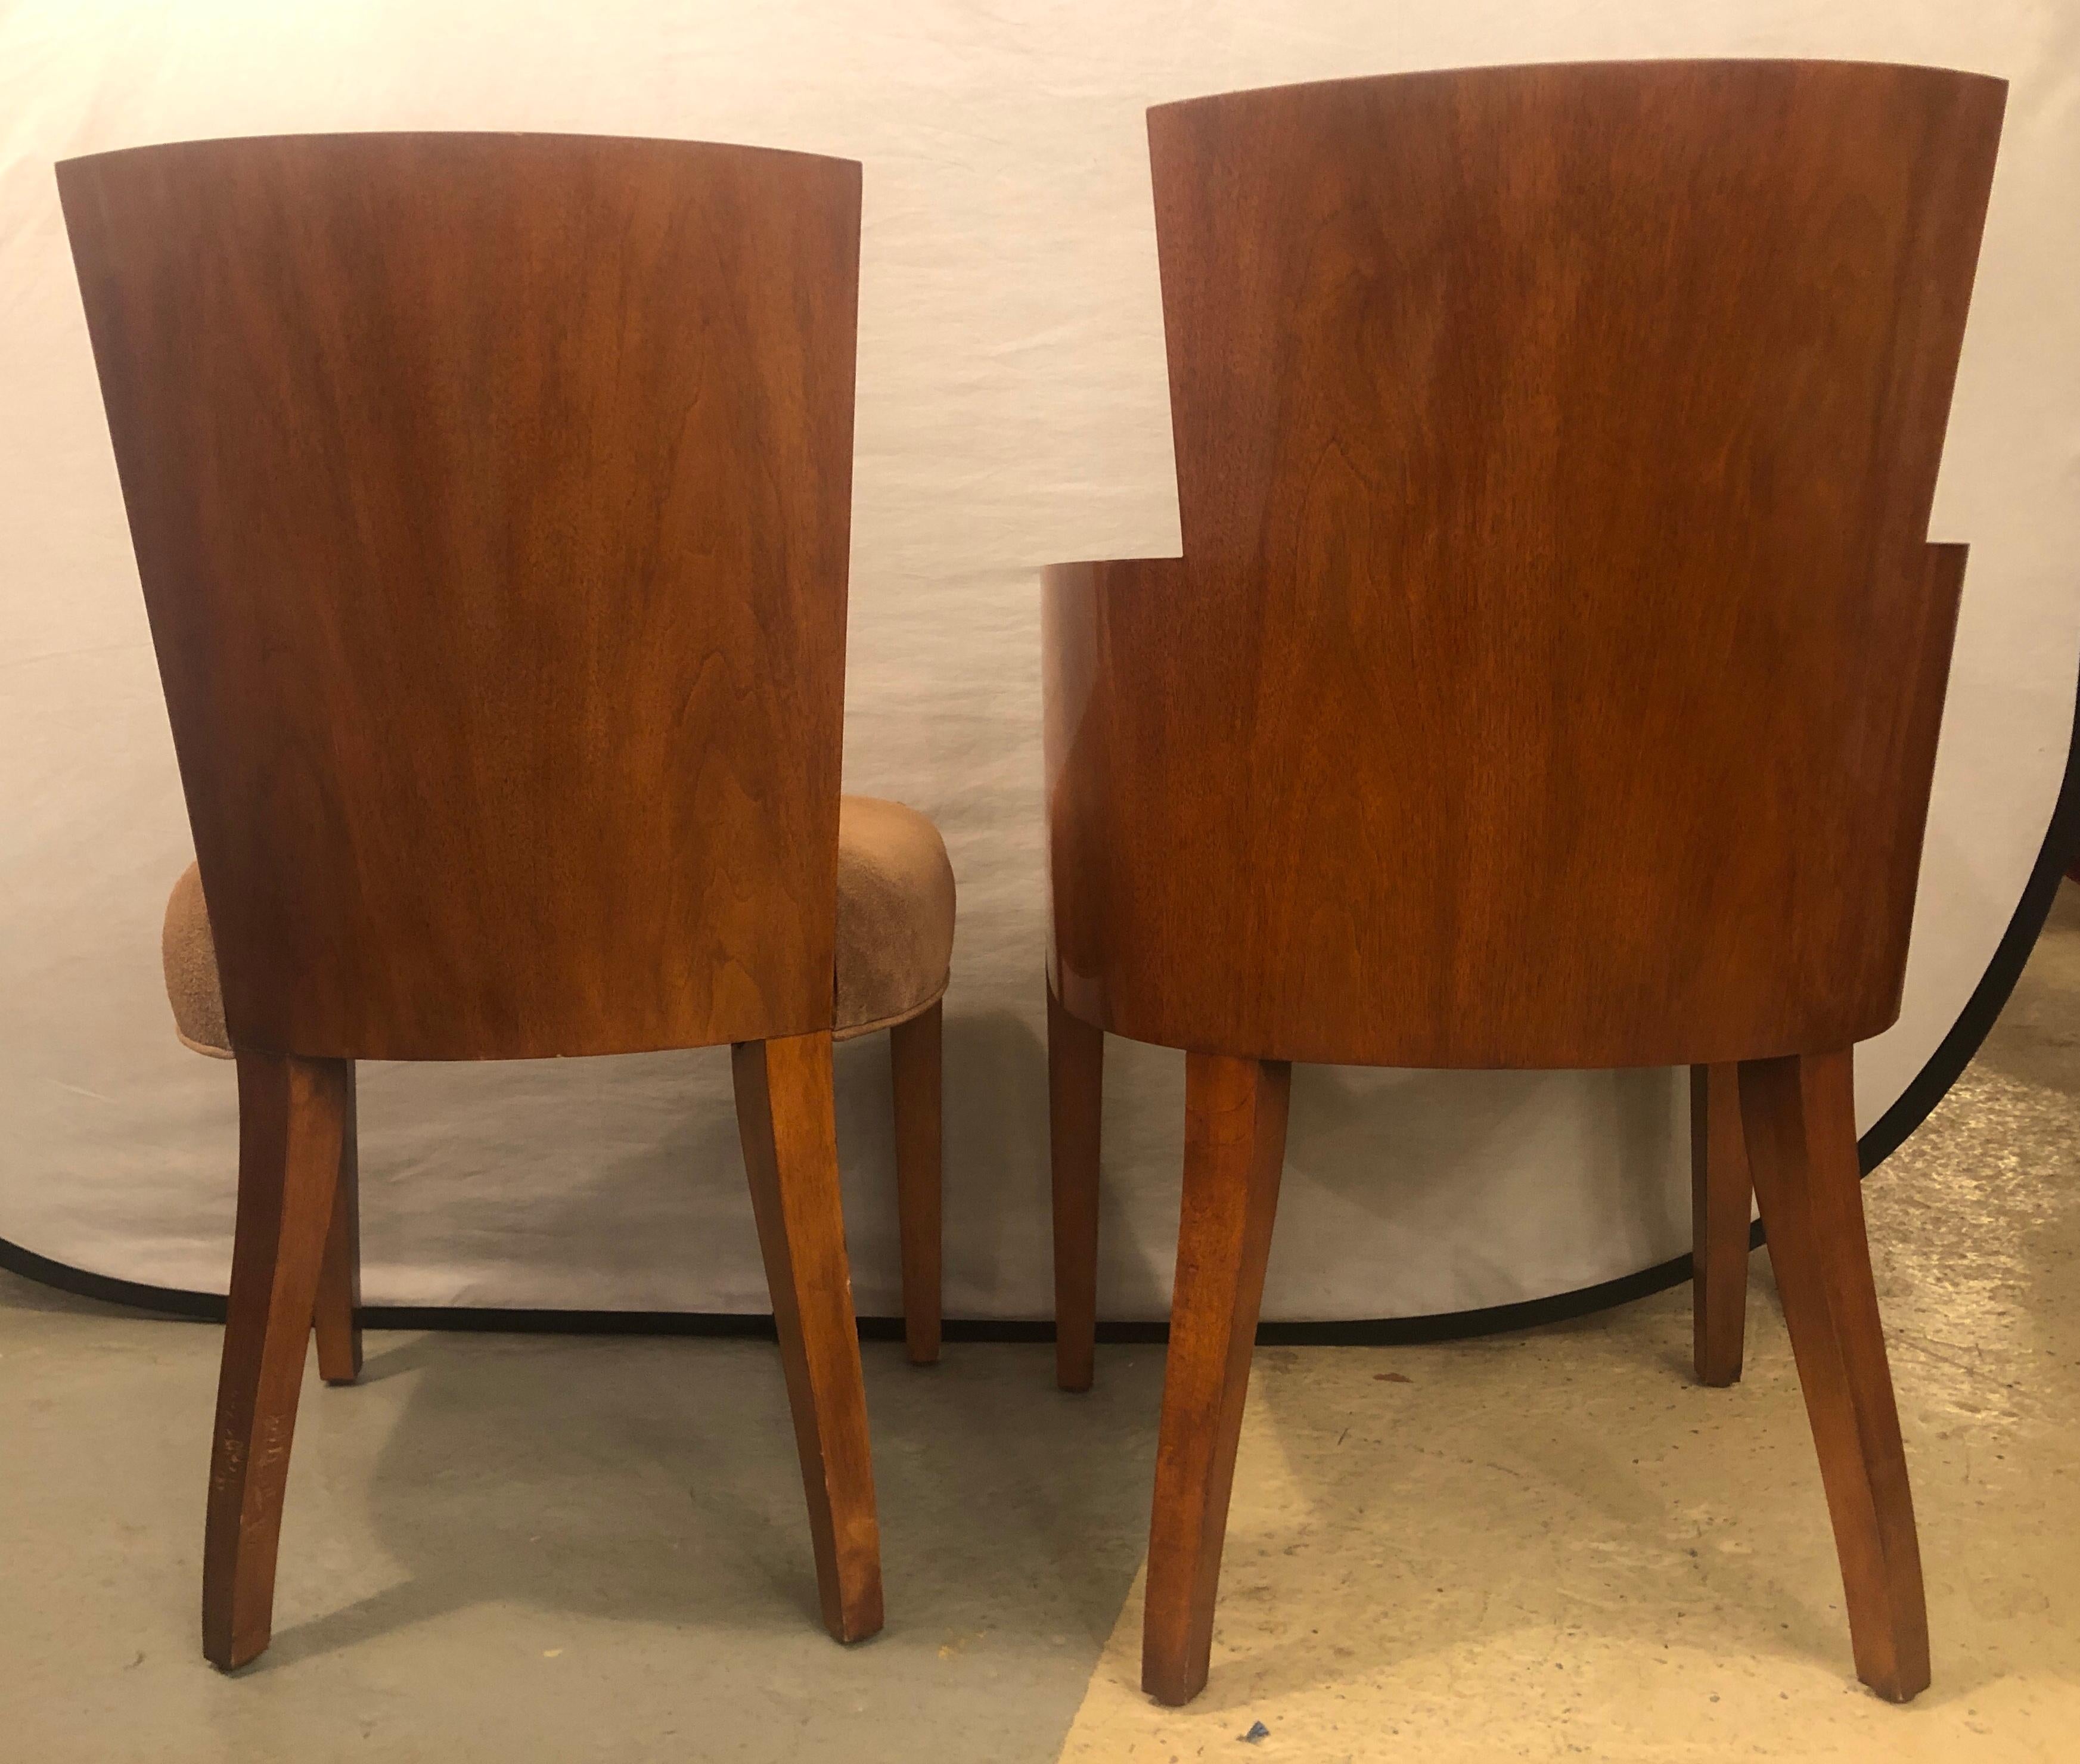 8 Modern Hollywood Mahogany Ralph Lauren Dining Chairs with Suede Seats 6 and 2 8